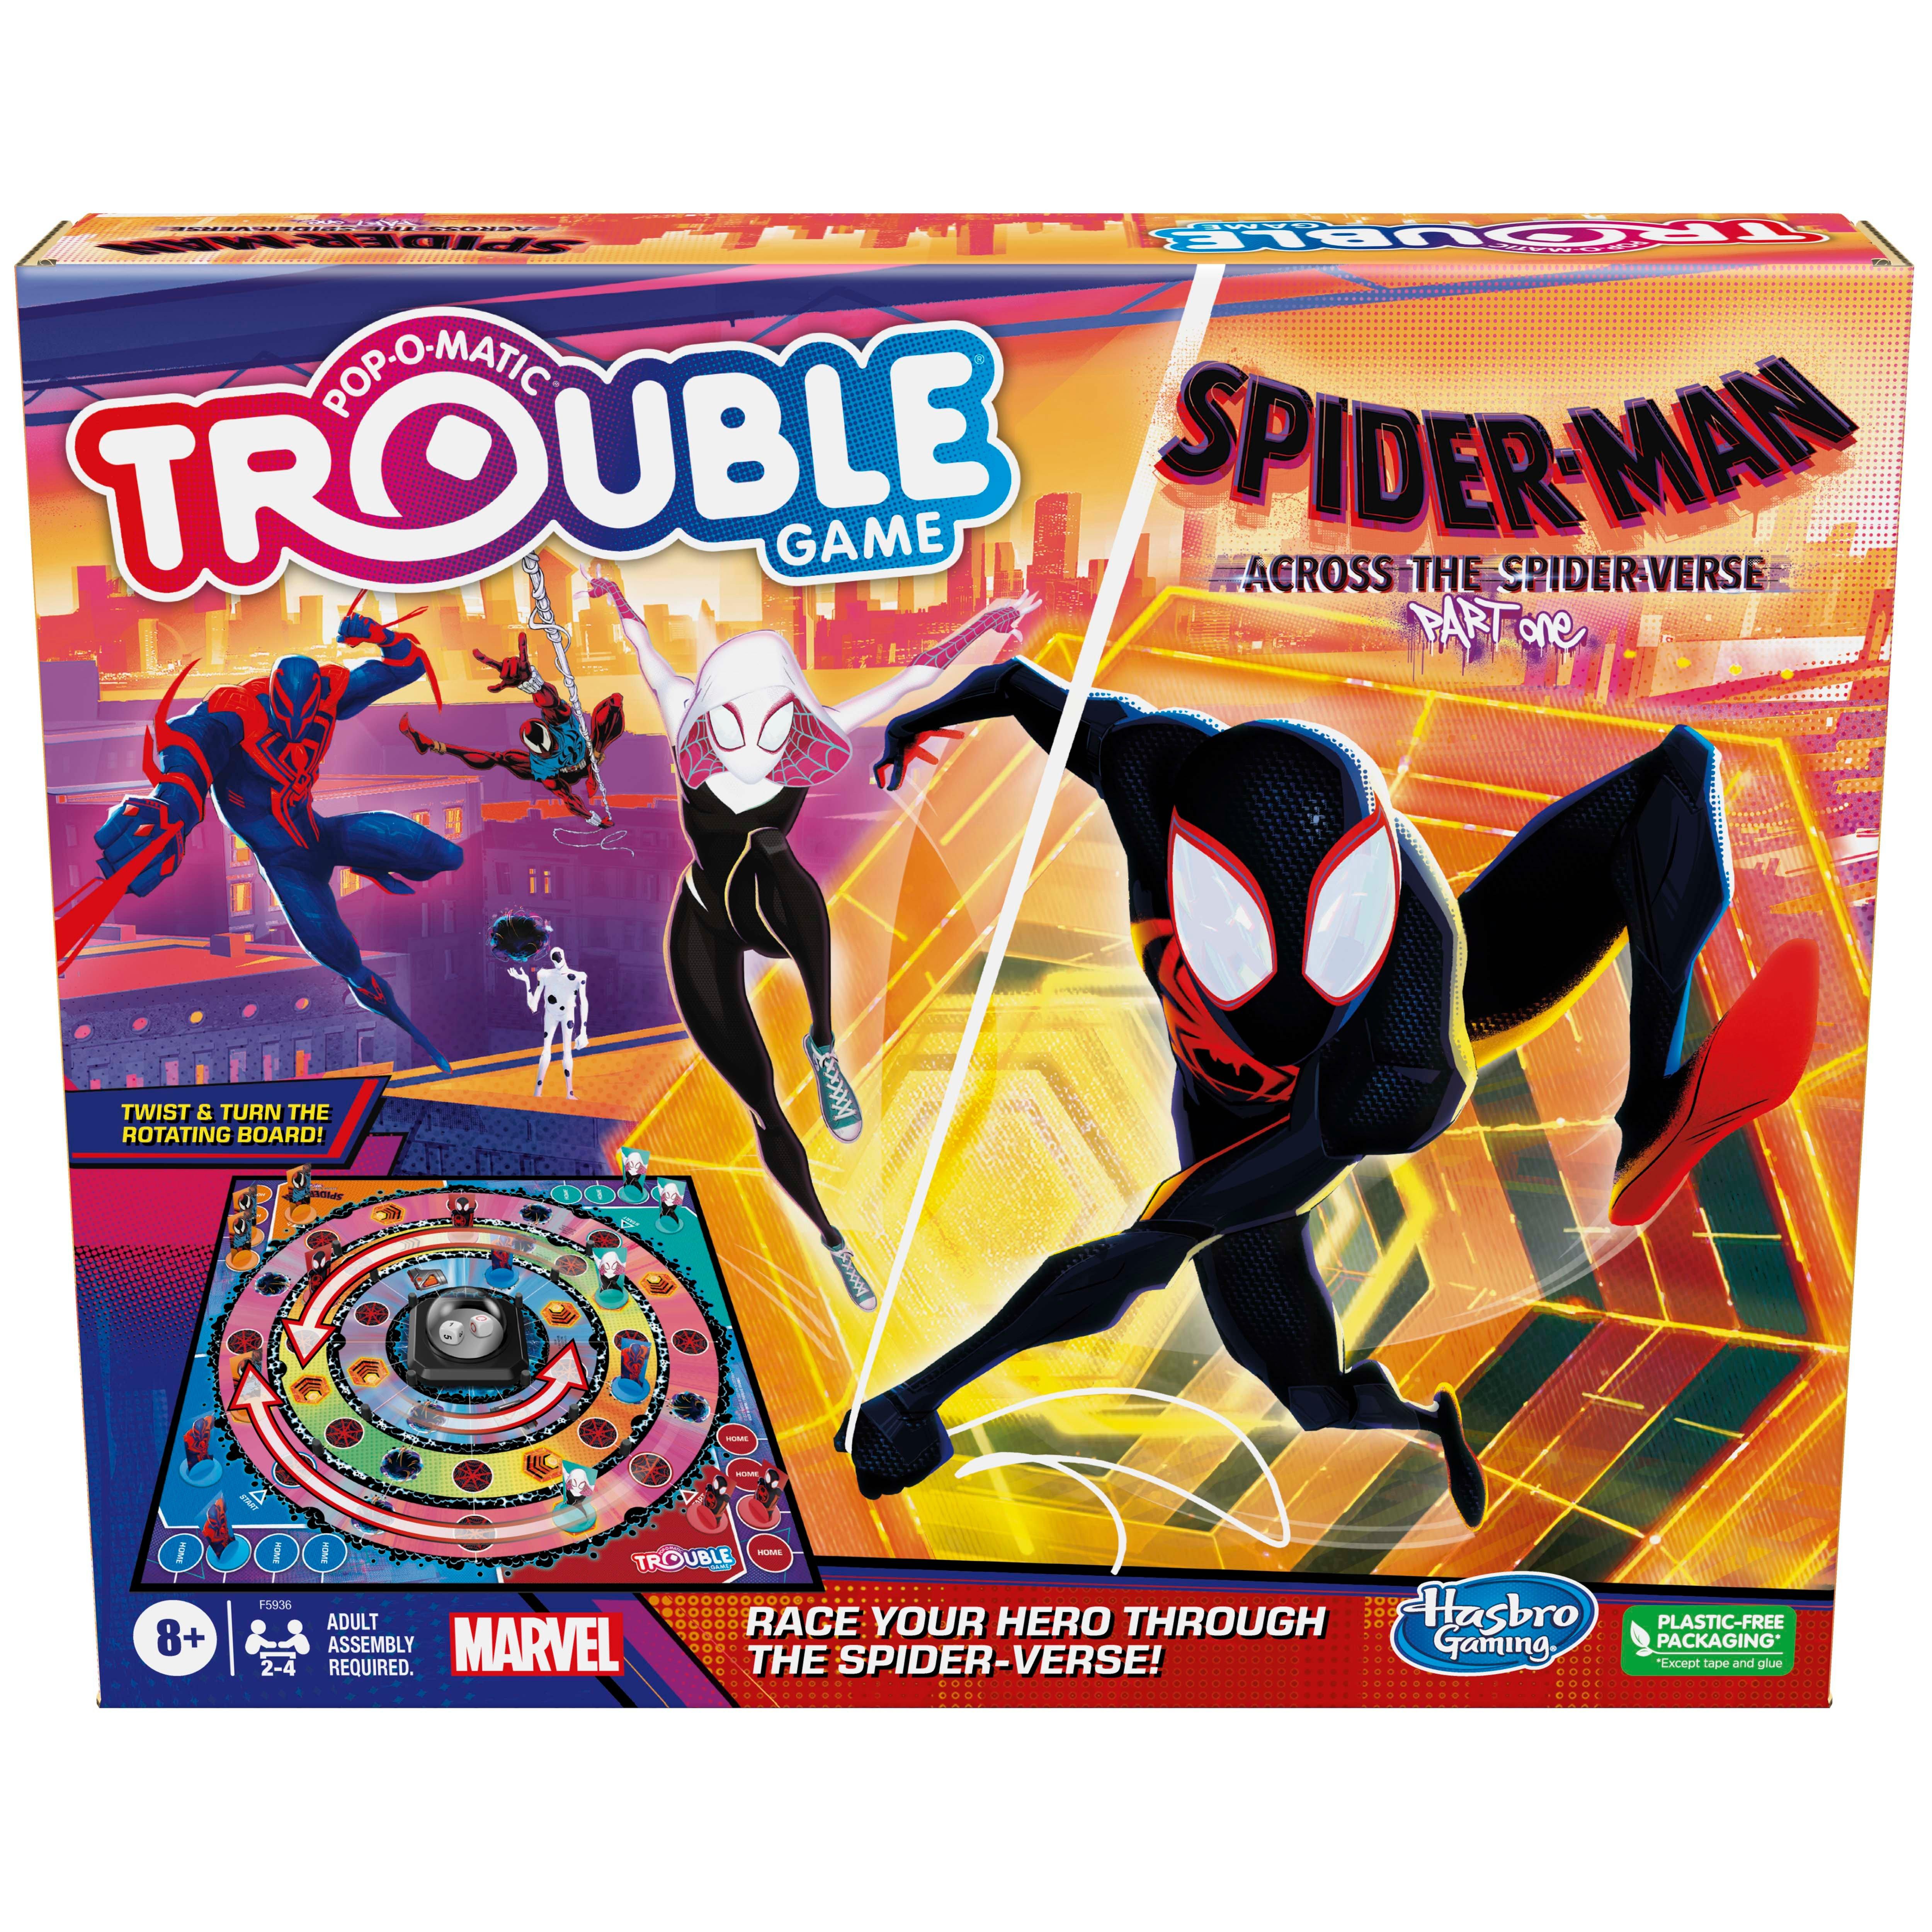 Hasbro Marvel Spider-Man: Across the Spider-Verse (Part One) Pop-O-Matic  Trouble Board Game | GameStop